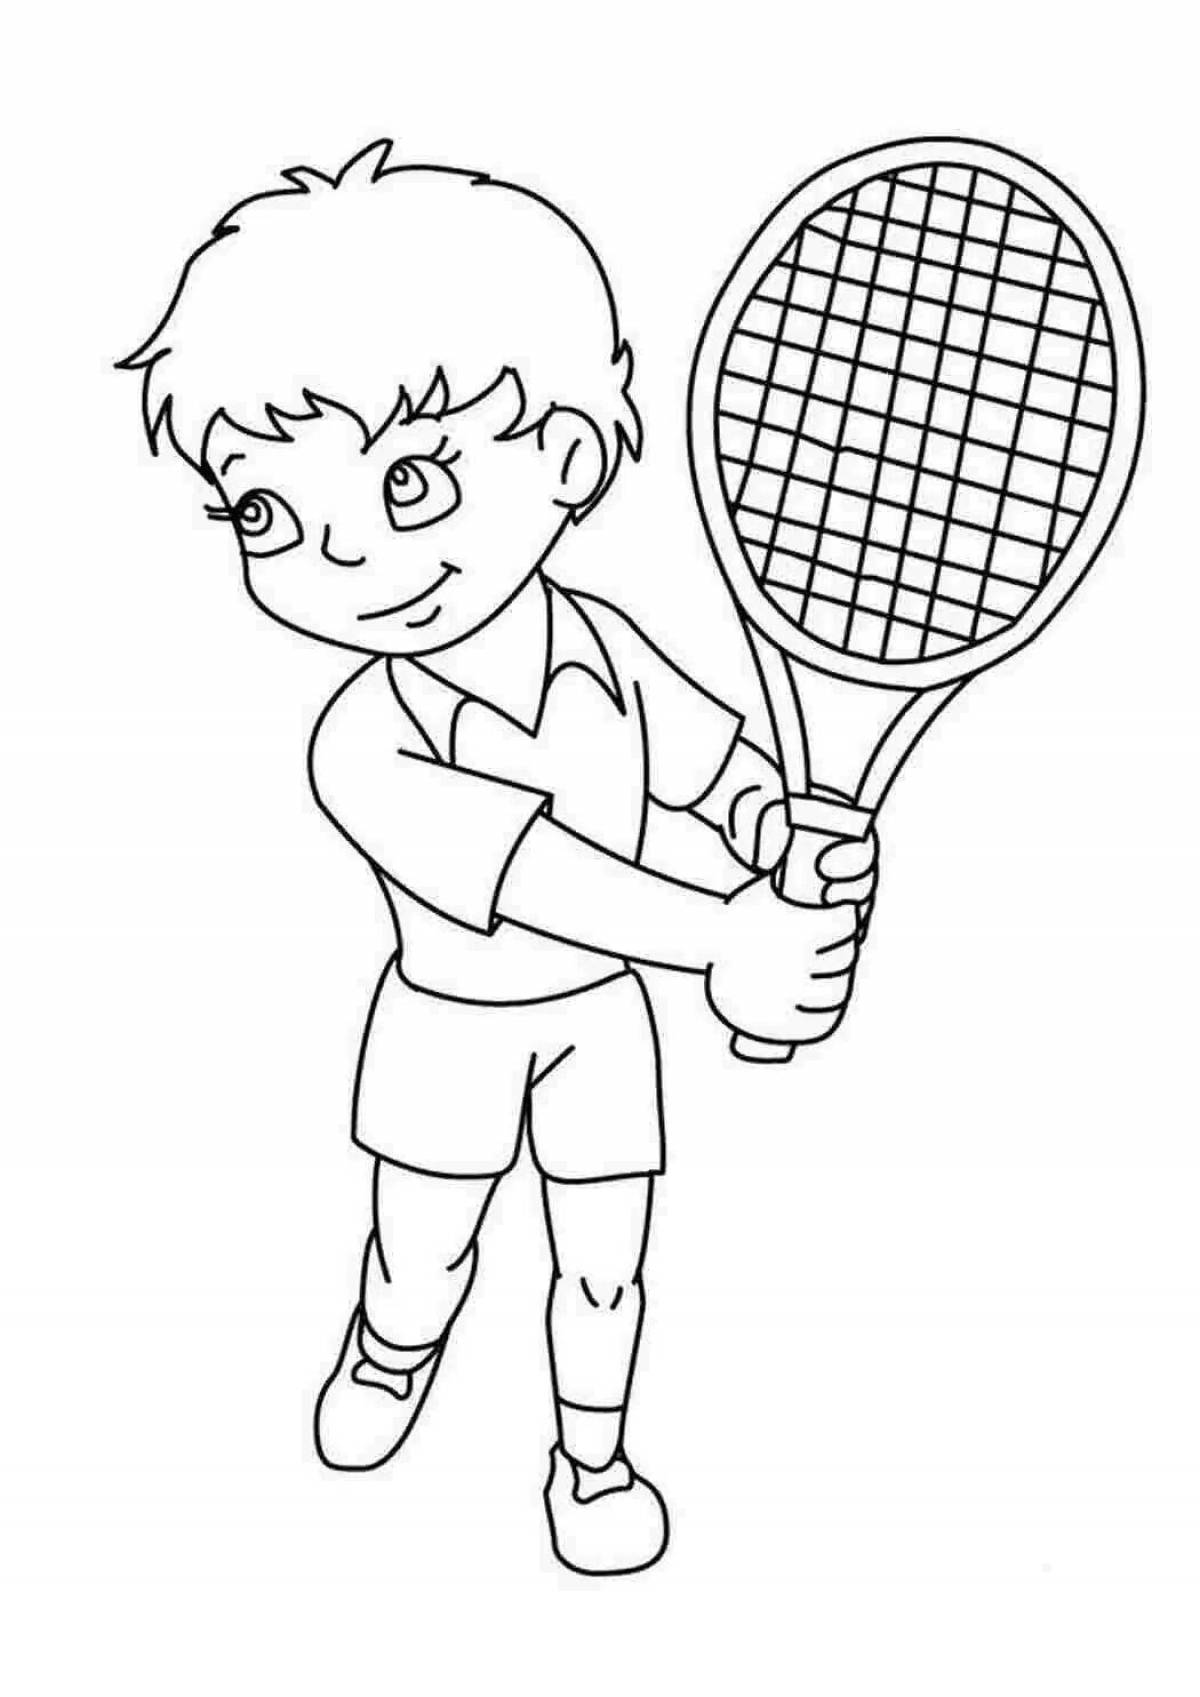 Amazing sports coloring book for kindergarten